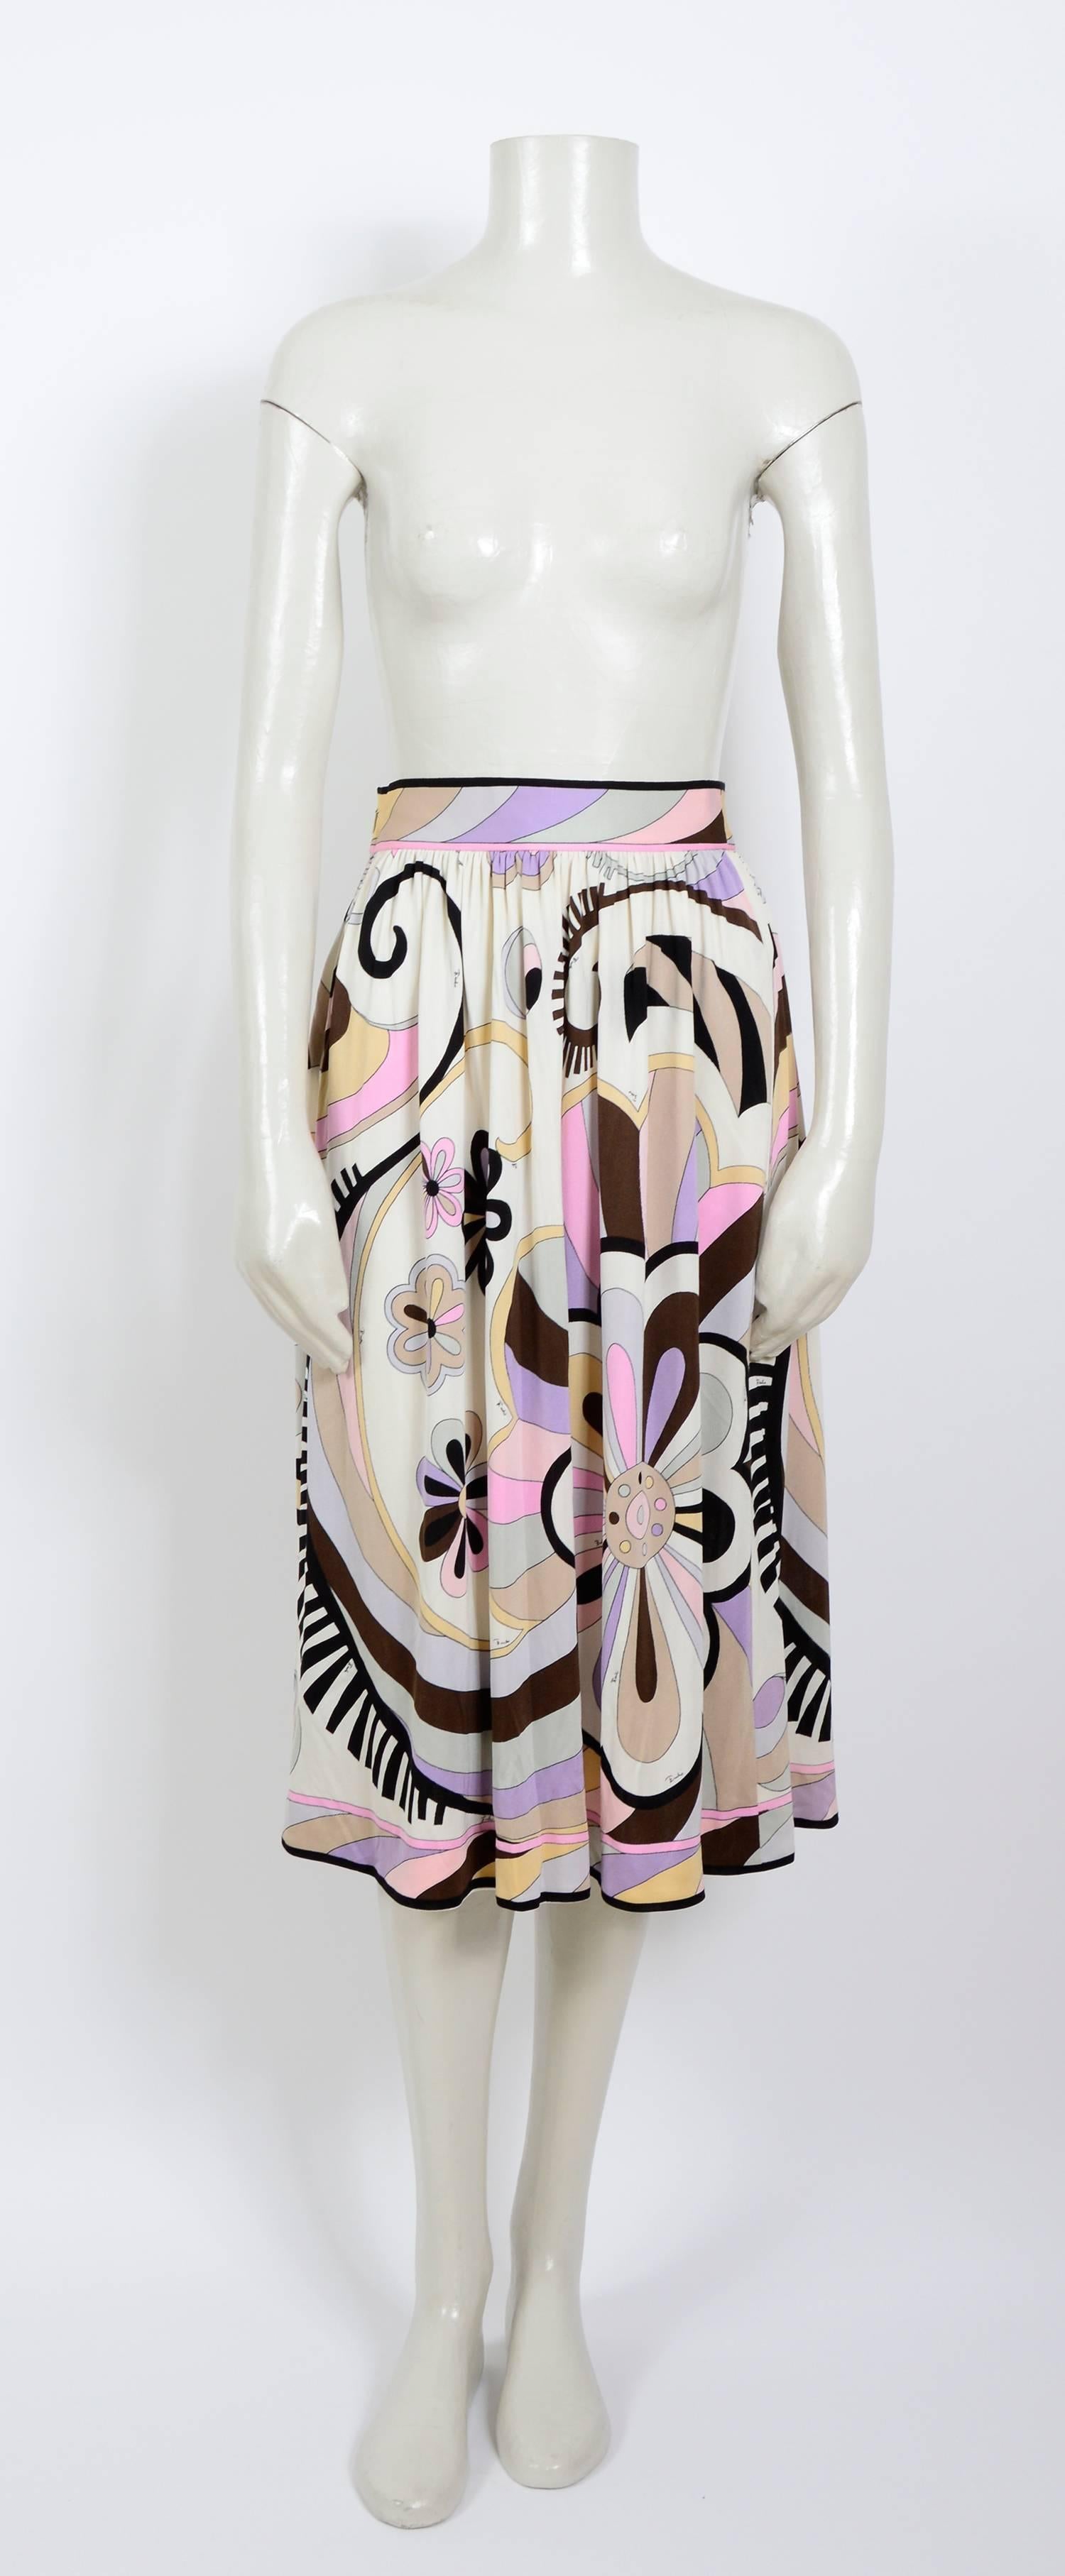 Vintage 1970s Emilio Pucci silk jersey signed skirt.
Measurements are taken flat:
Waist 12inch/31cm (x2)- Hip Free - Total Length 30inch/76cm